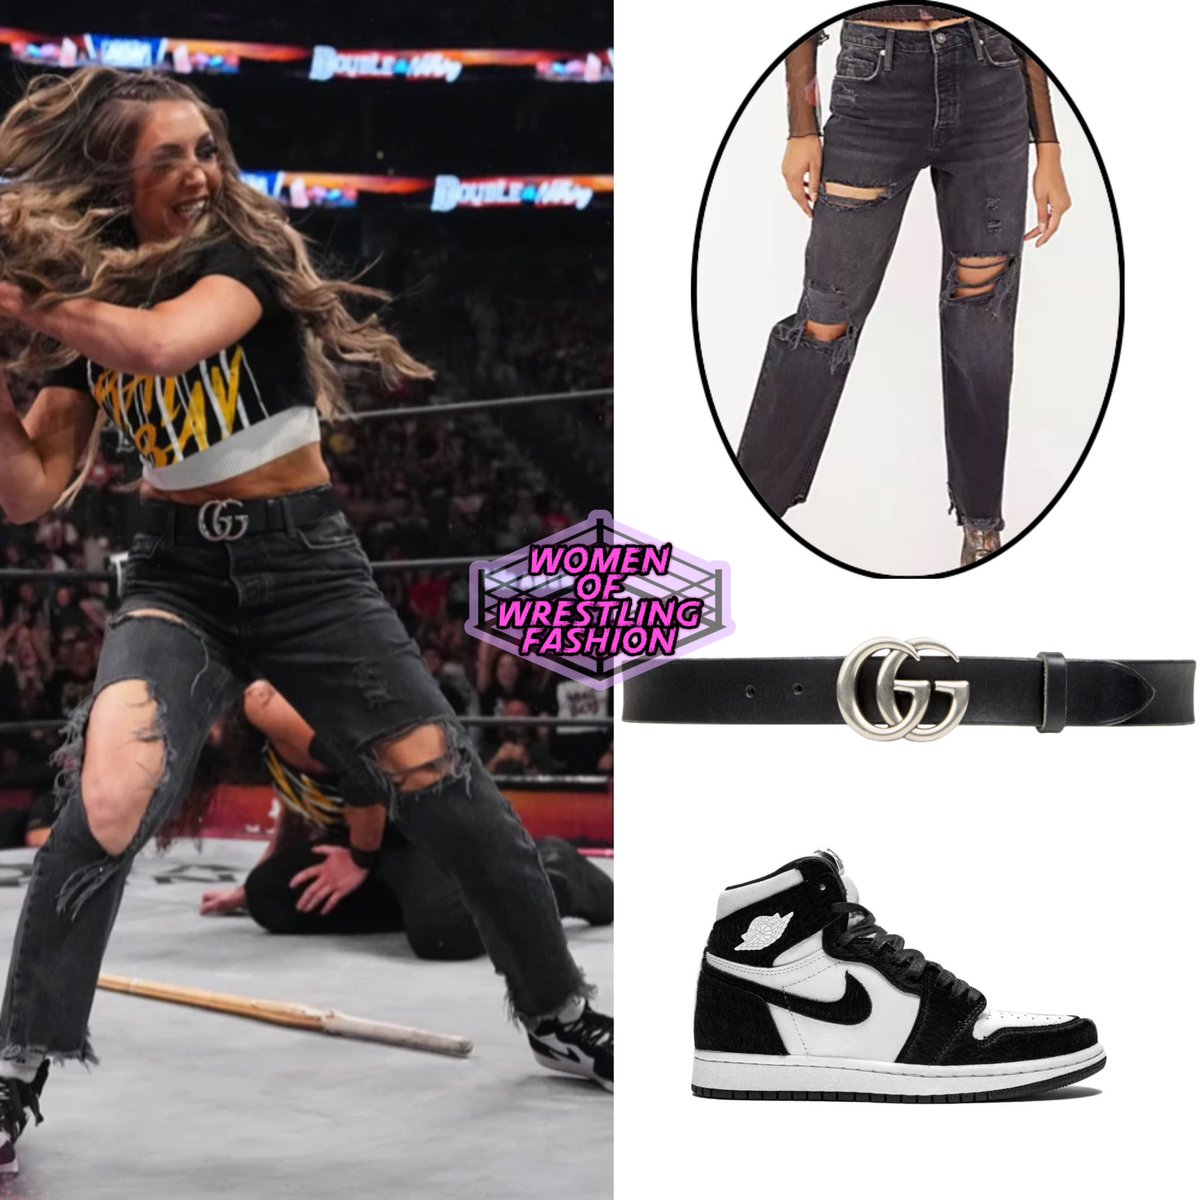 At #AEWDoN @RealBrittBaker wore the Tapered Baggy Boyfriend Jeans from @FreePeople (no longer sold), the Leather Belt with Double G Buckle from @Gucci ($490) and the Air Jordan 1 Retro High OG 'Panda' sneakers (prices vary)